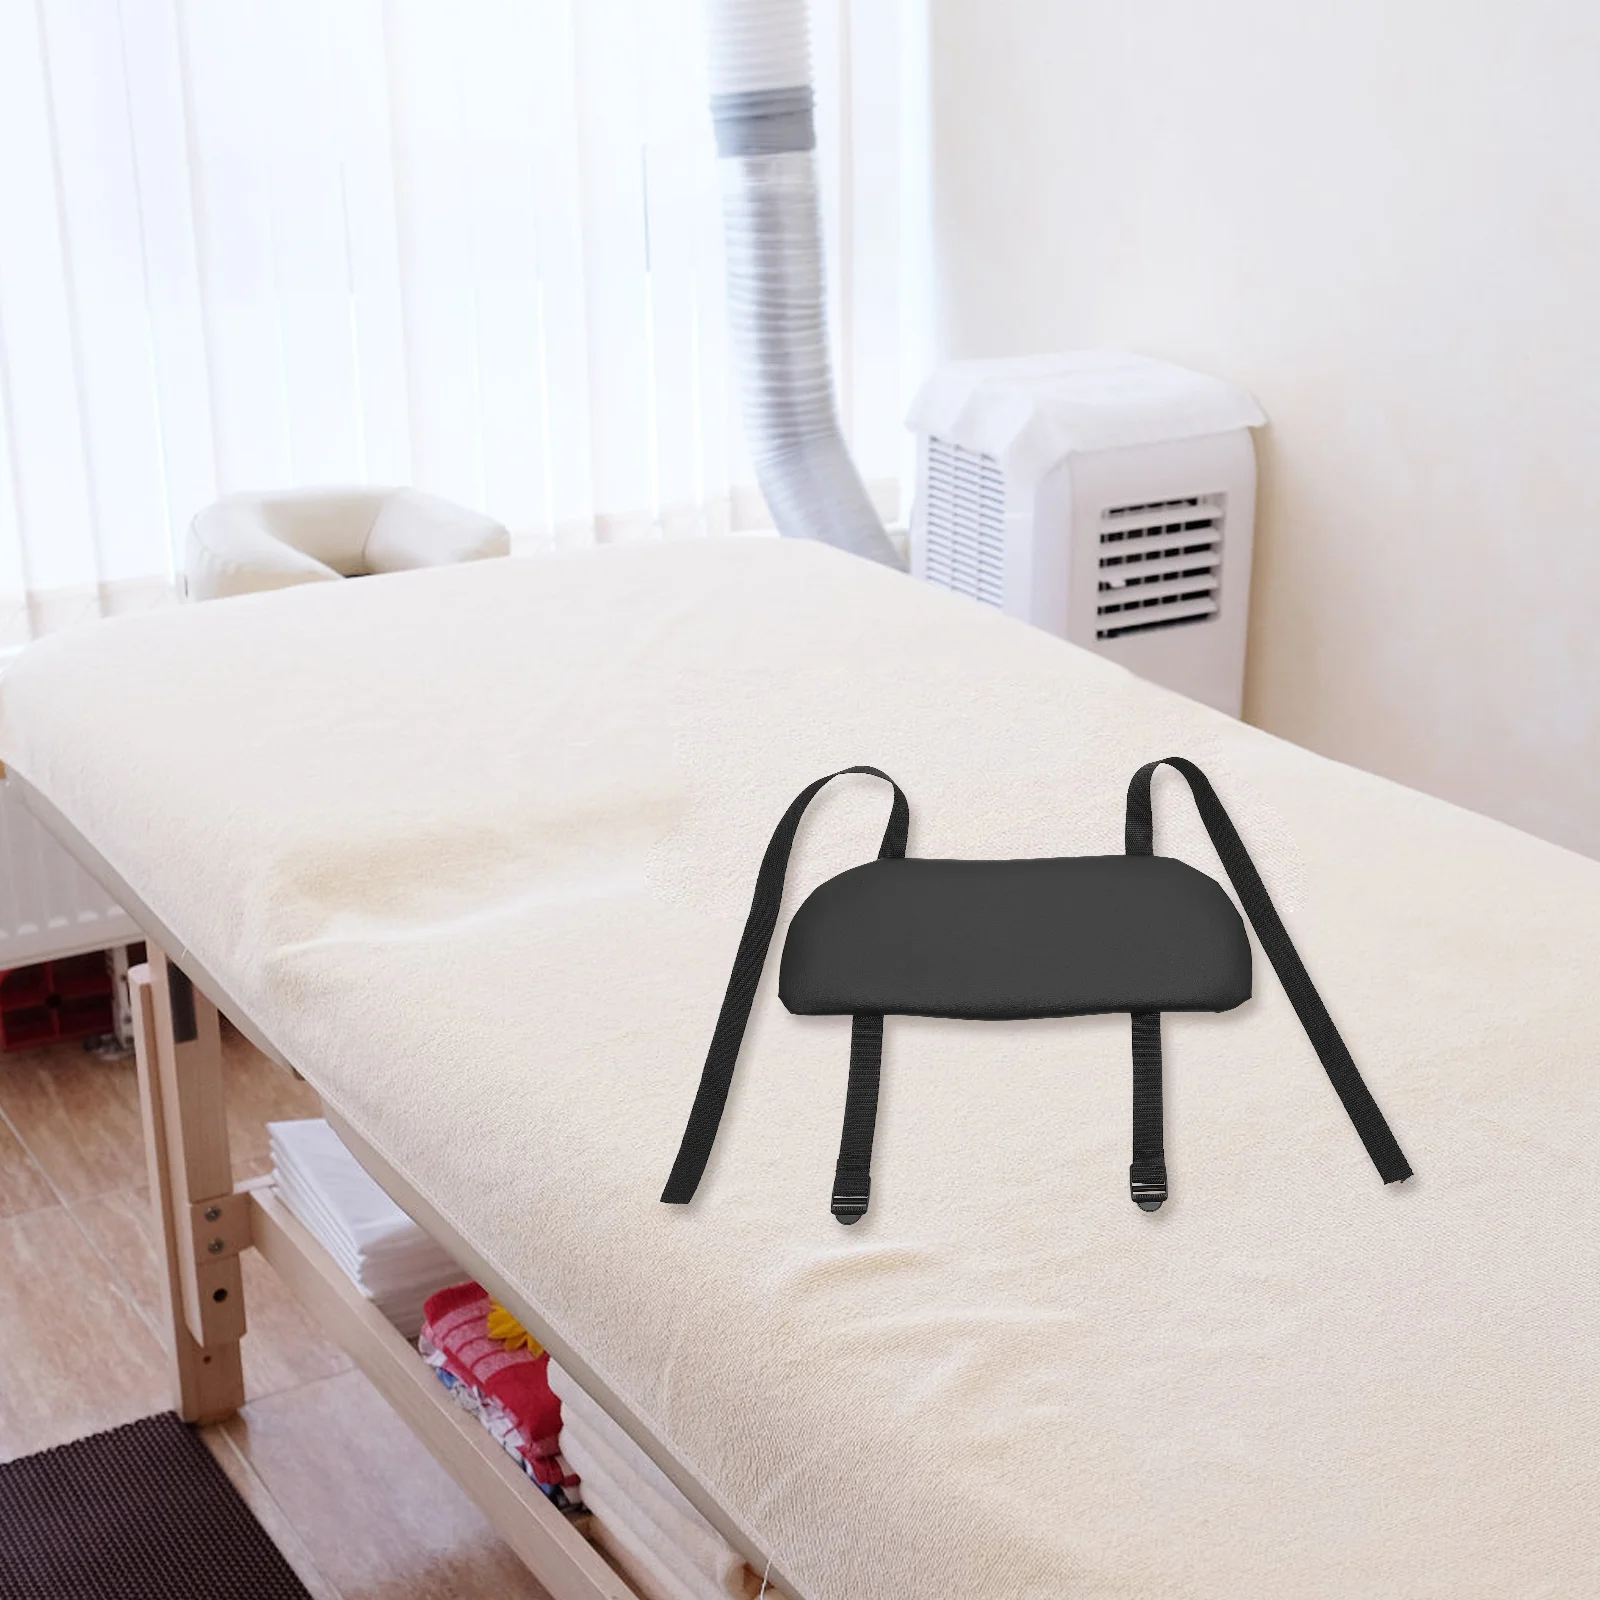 Massage Table Armrest Table Bed Accessories Comfortable Accessory Hanging Beauty Pedal Portable Universal Tool Rack Pad